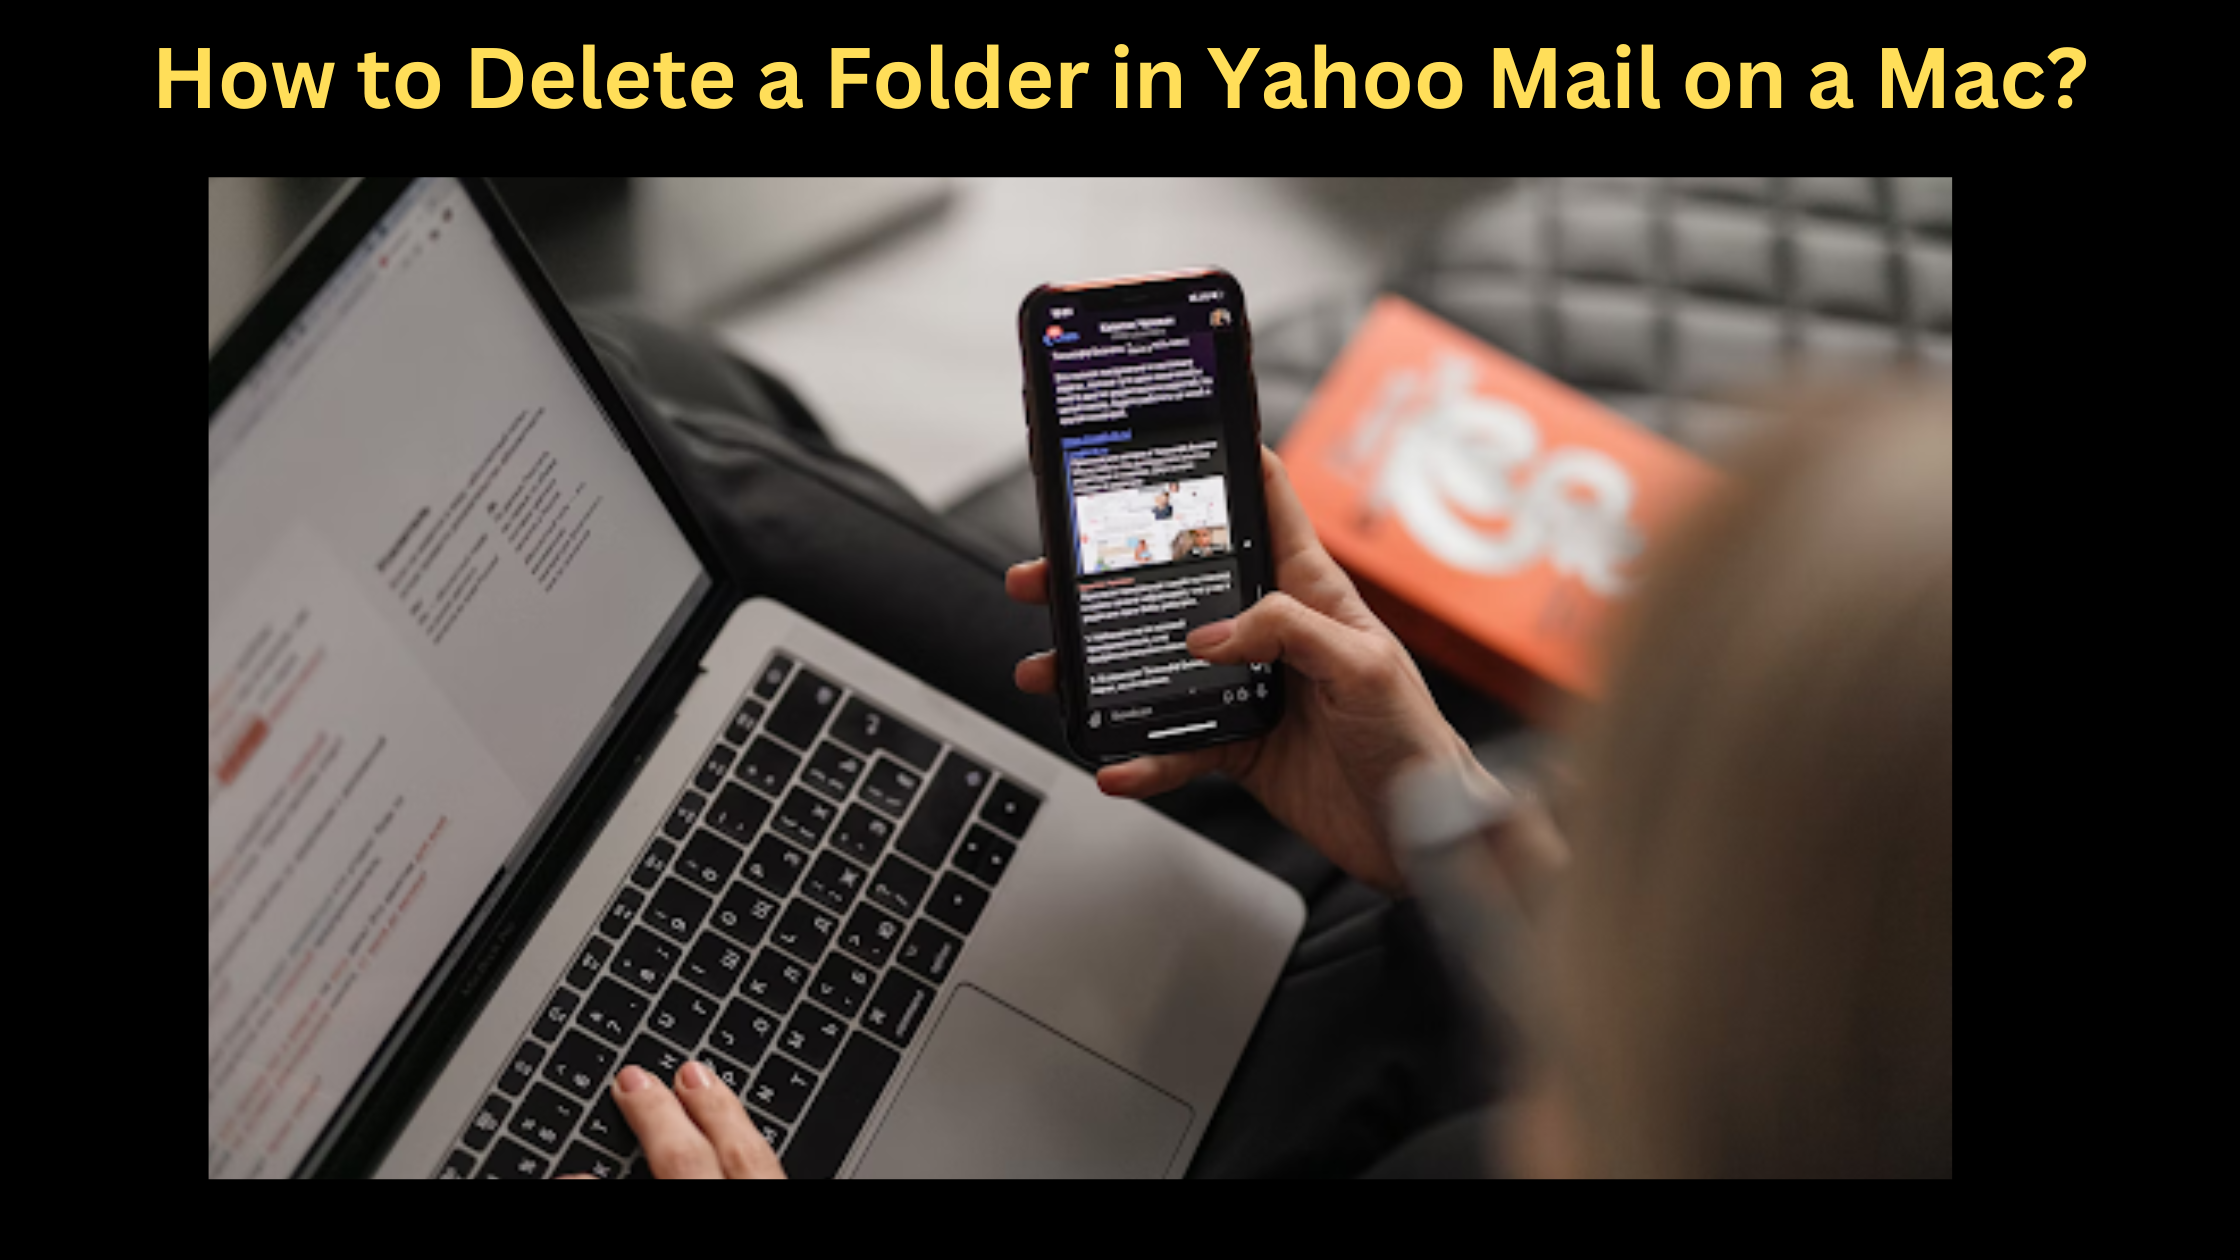 How to Delete a Folder in Yahoo Mail on a Mac